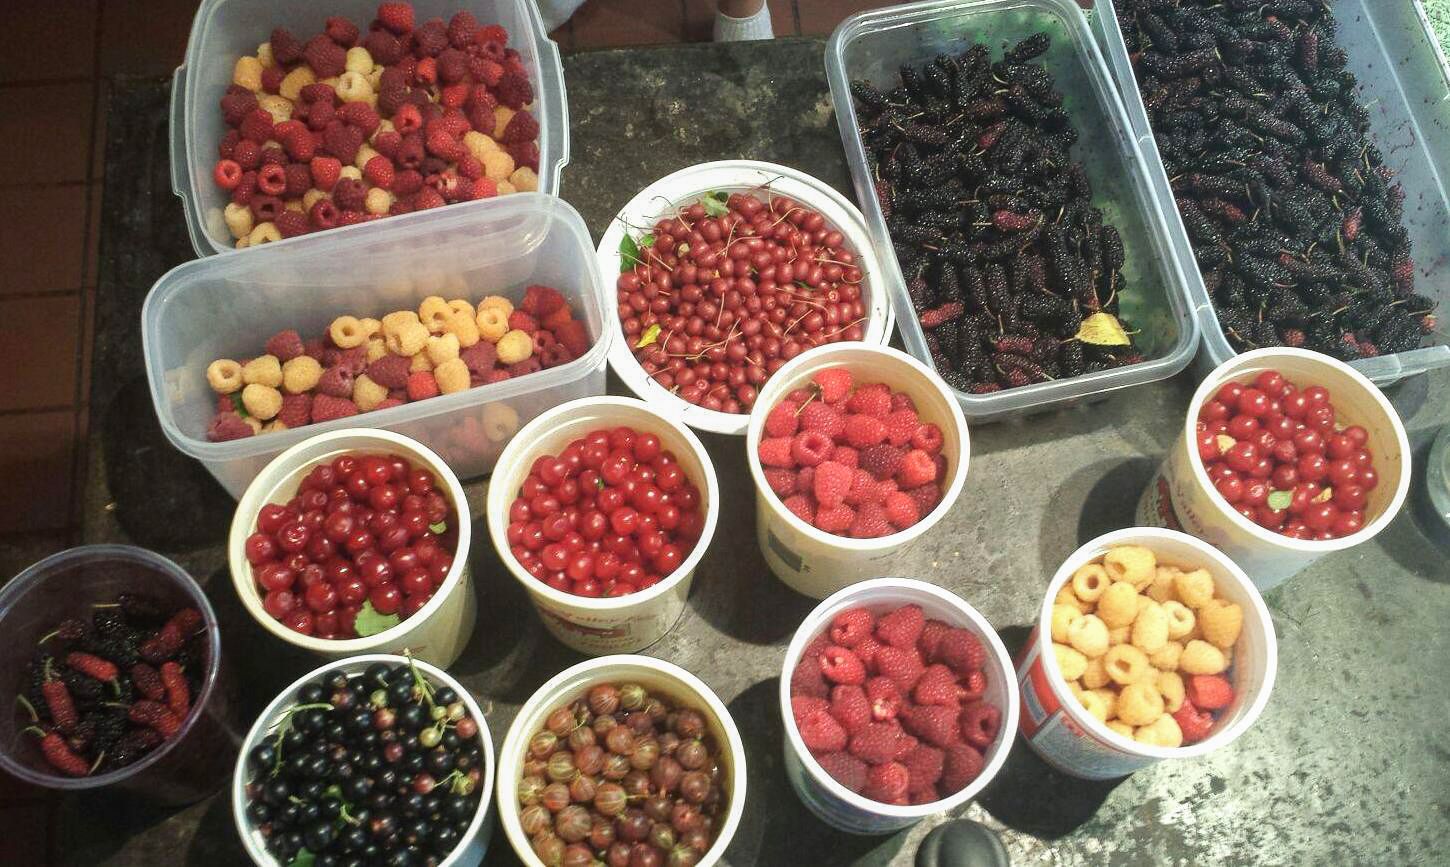 A morning's berry harvest from West Philadelphia's Ogden Orchard includes raspberries, gooseberries, currants, goumis and mulberri